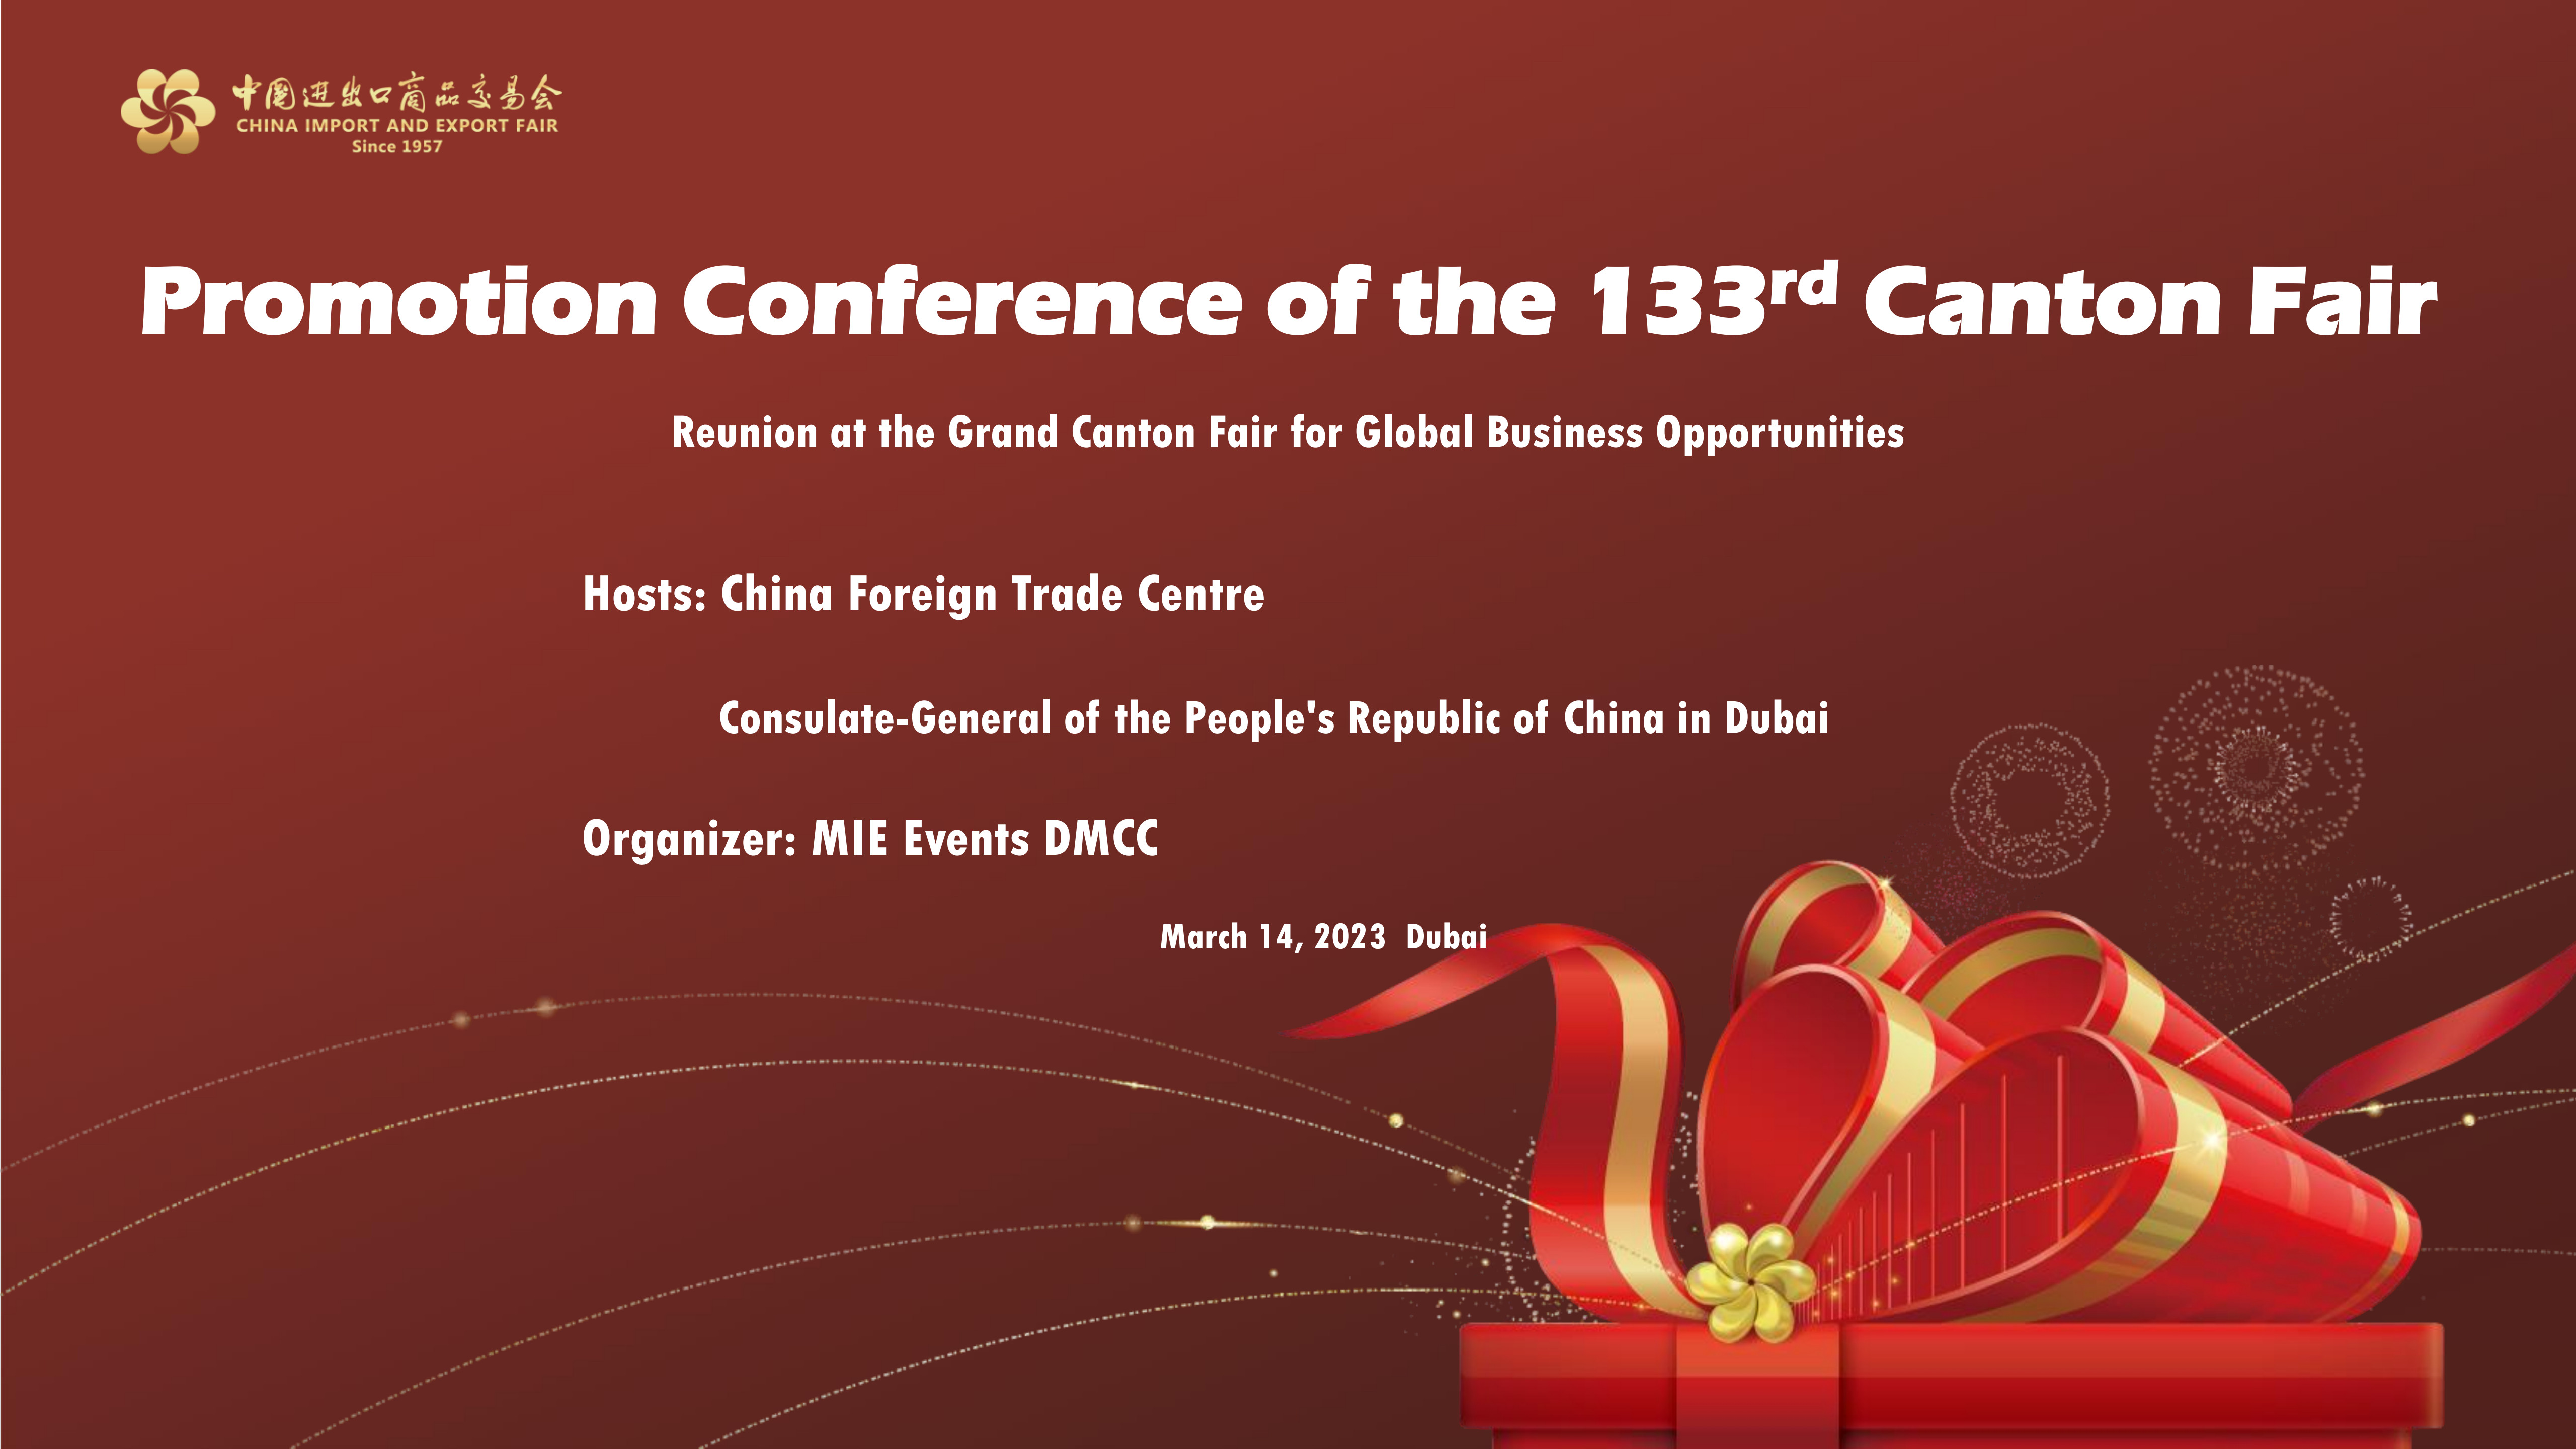 Promotion Conference of the 133rd Canton Fair held on 14th March, 2023 in Dubai